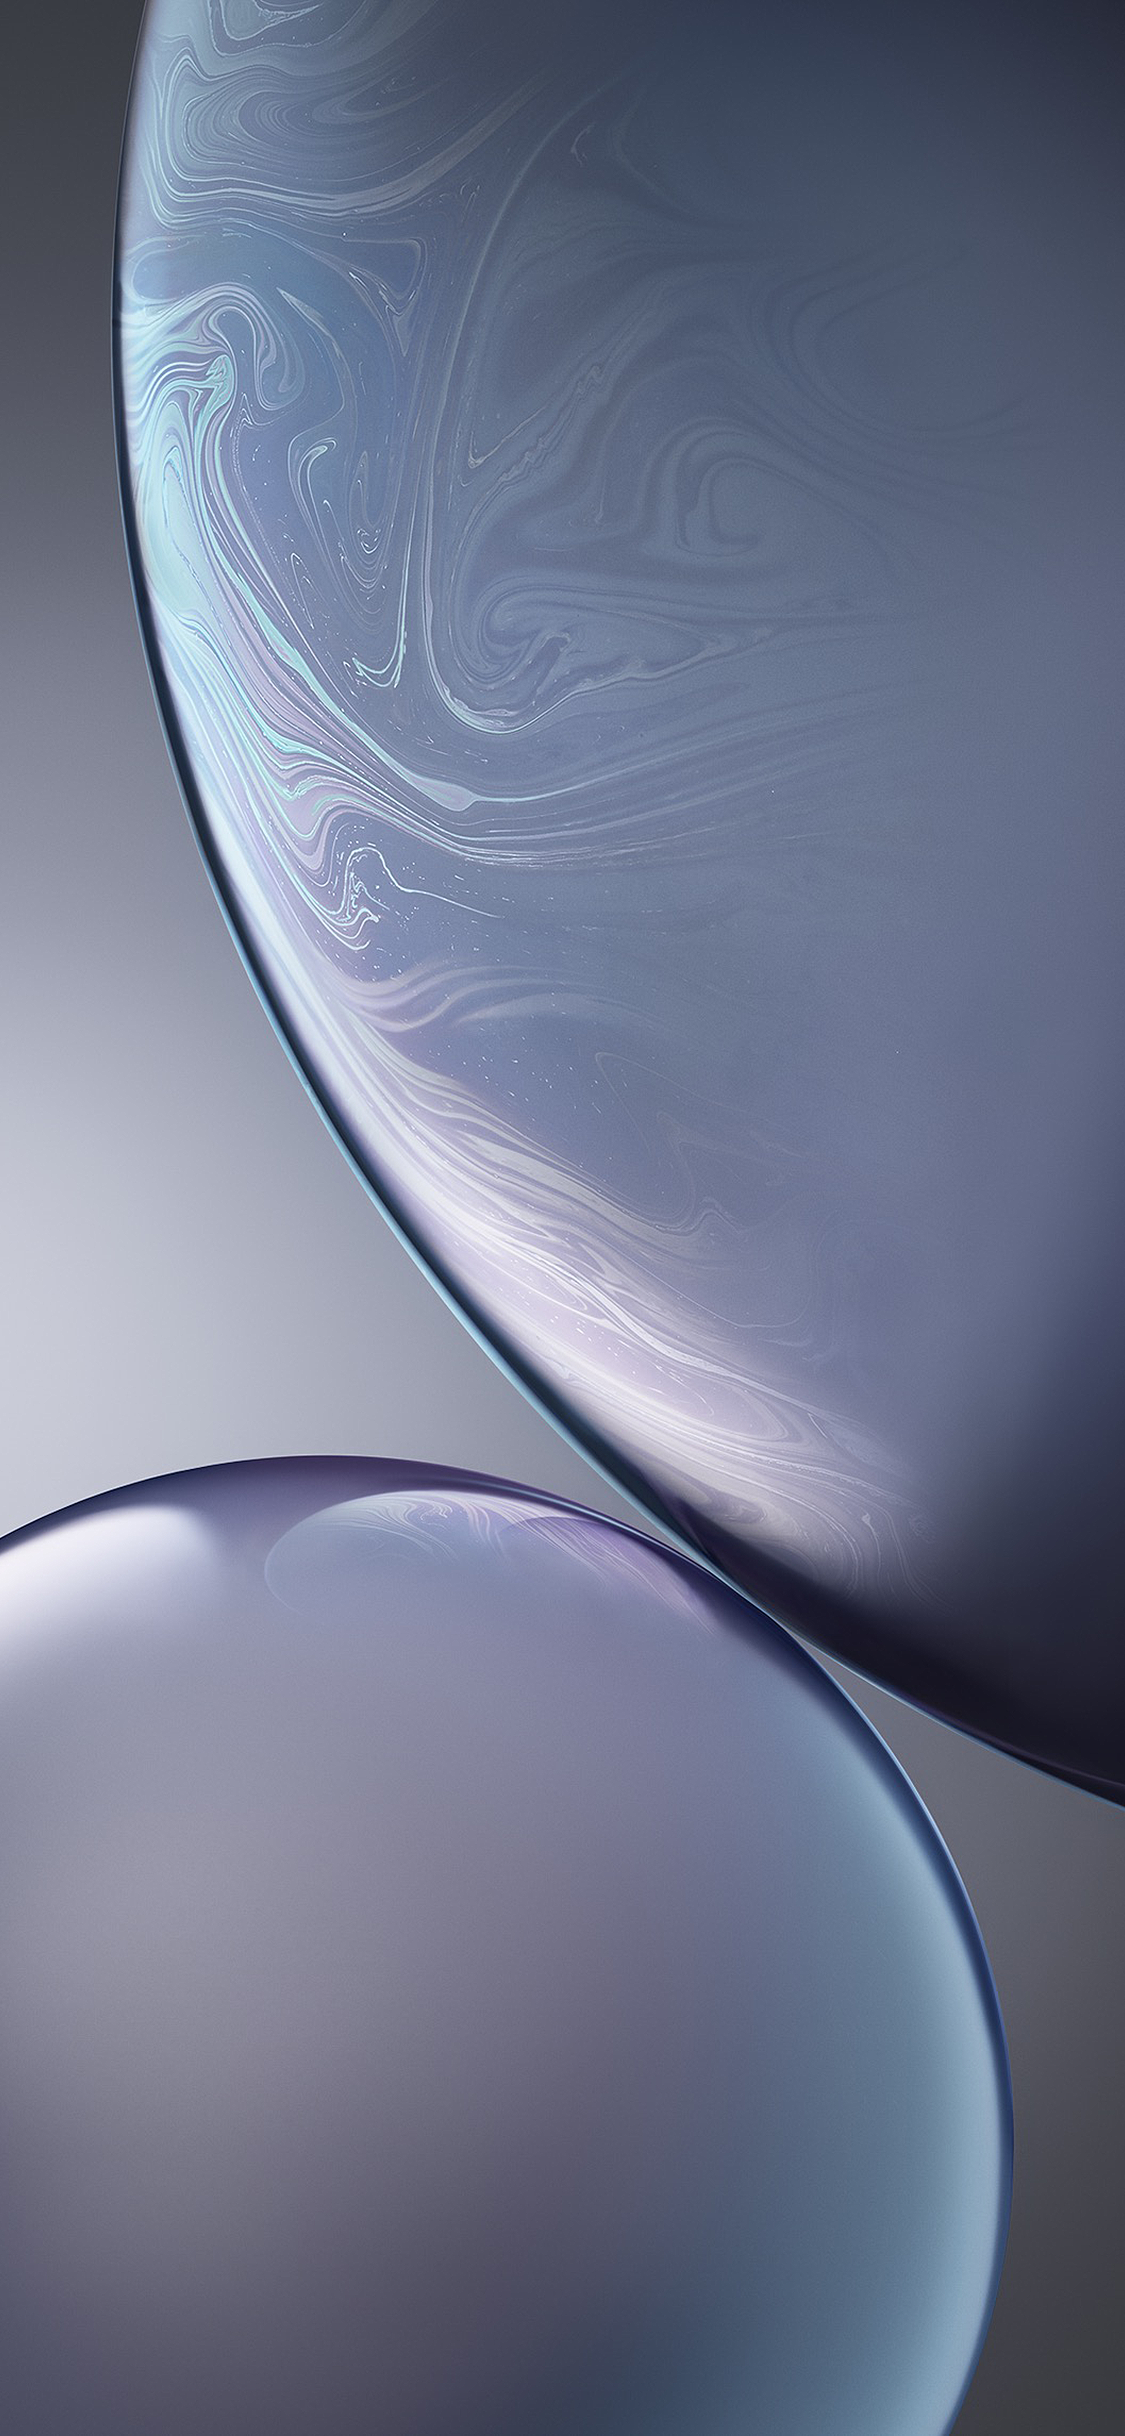 iPhone XS and iPhone XR wallpapers